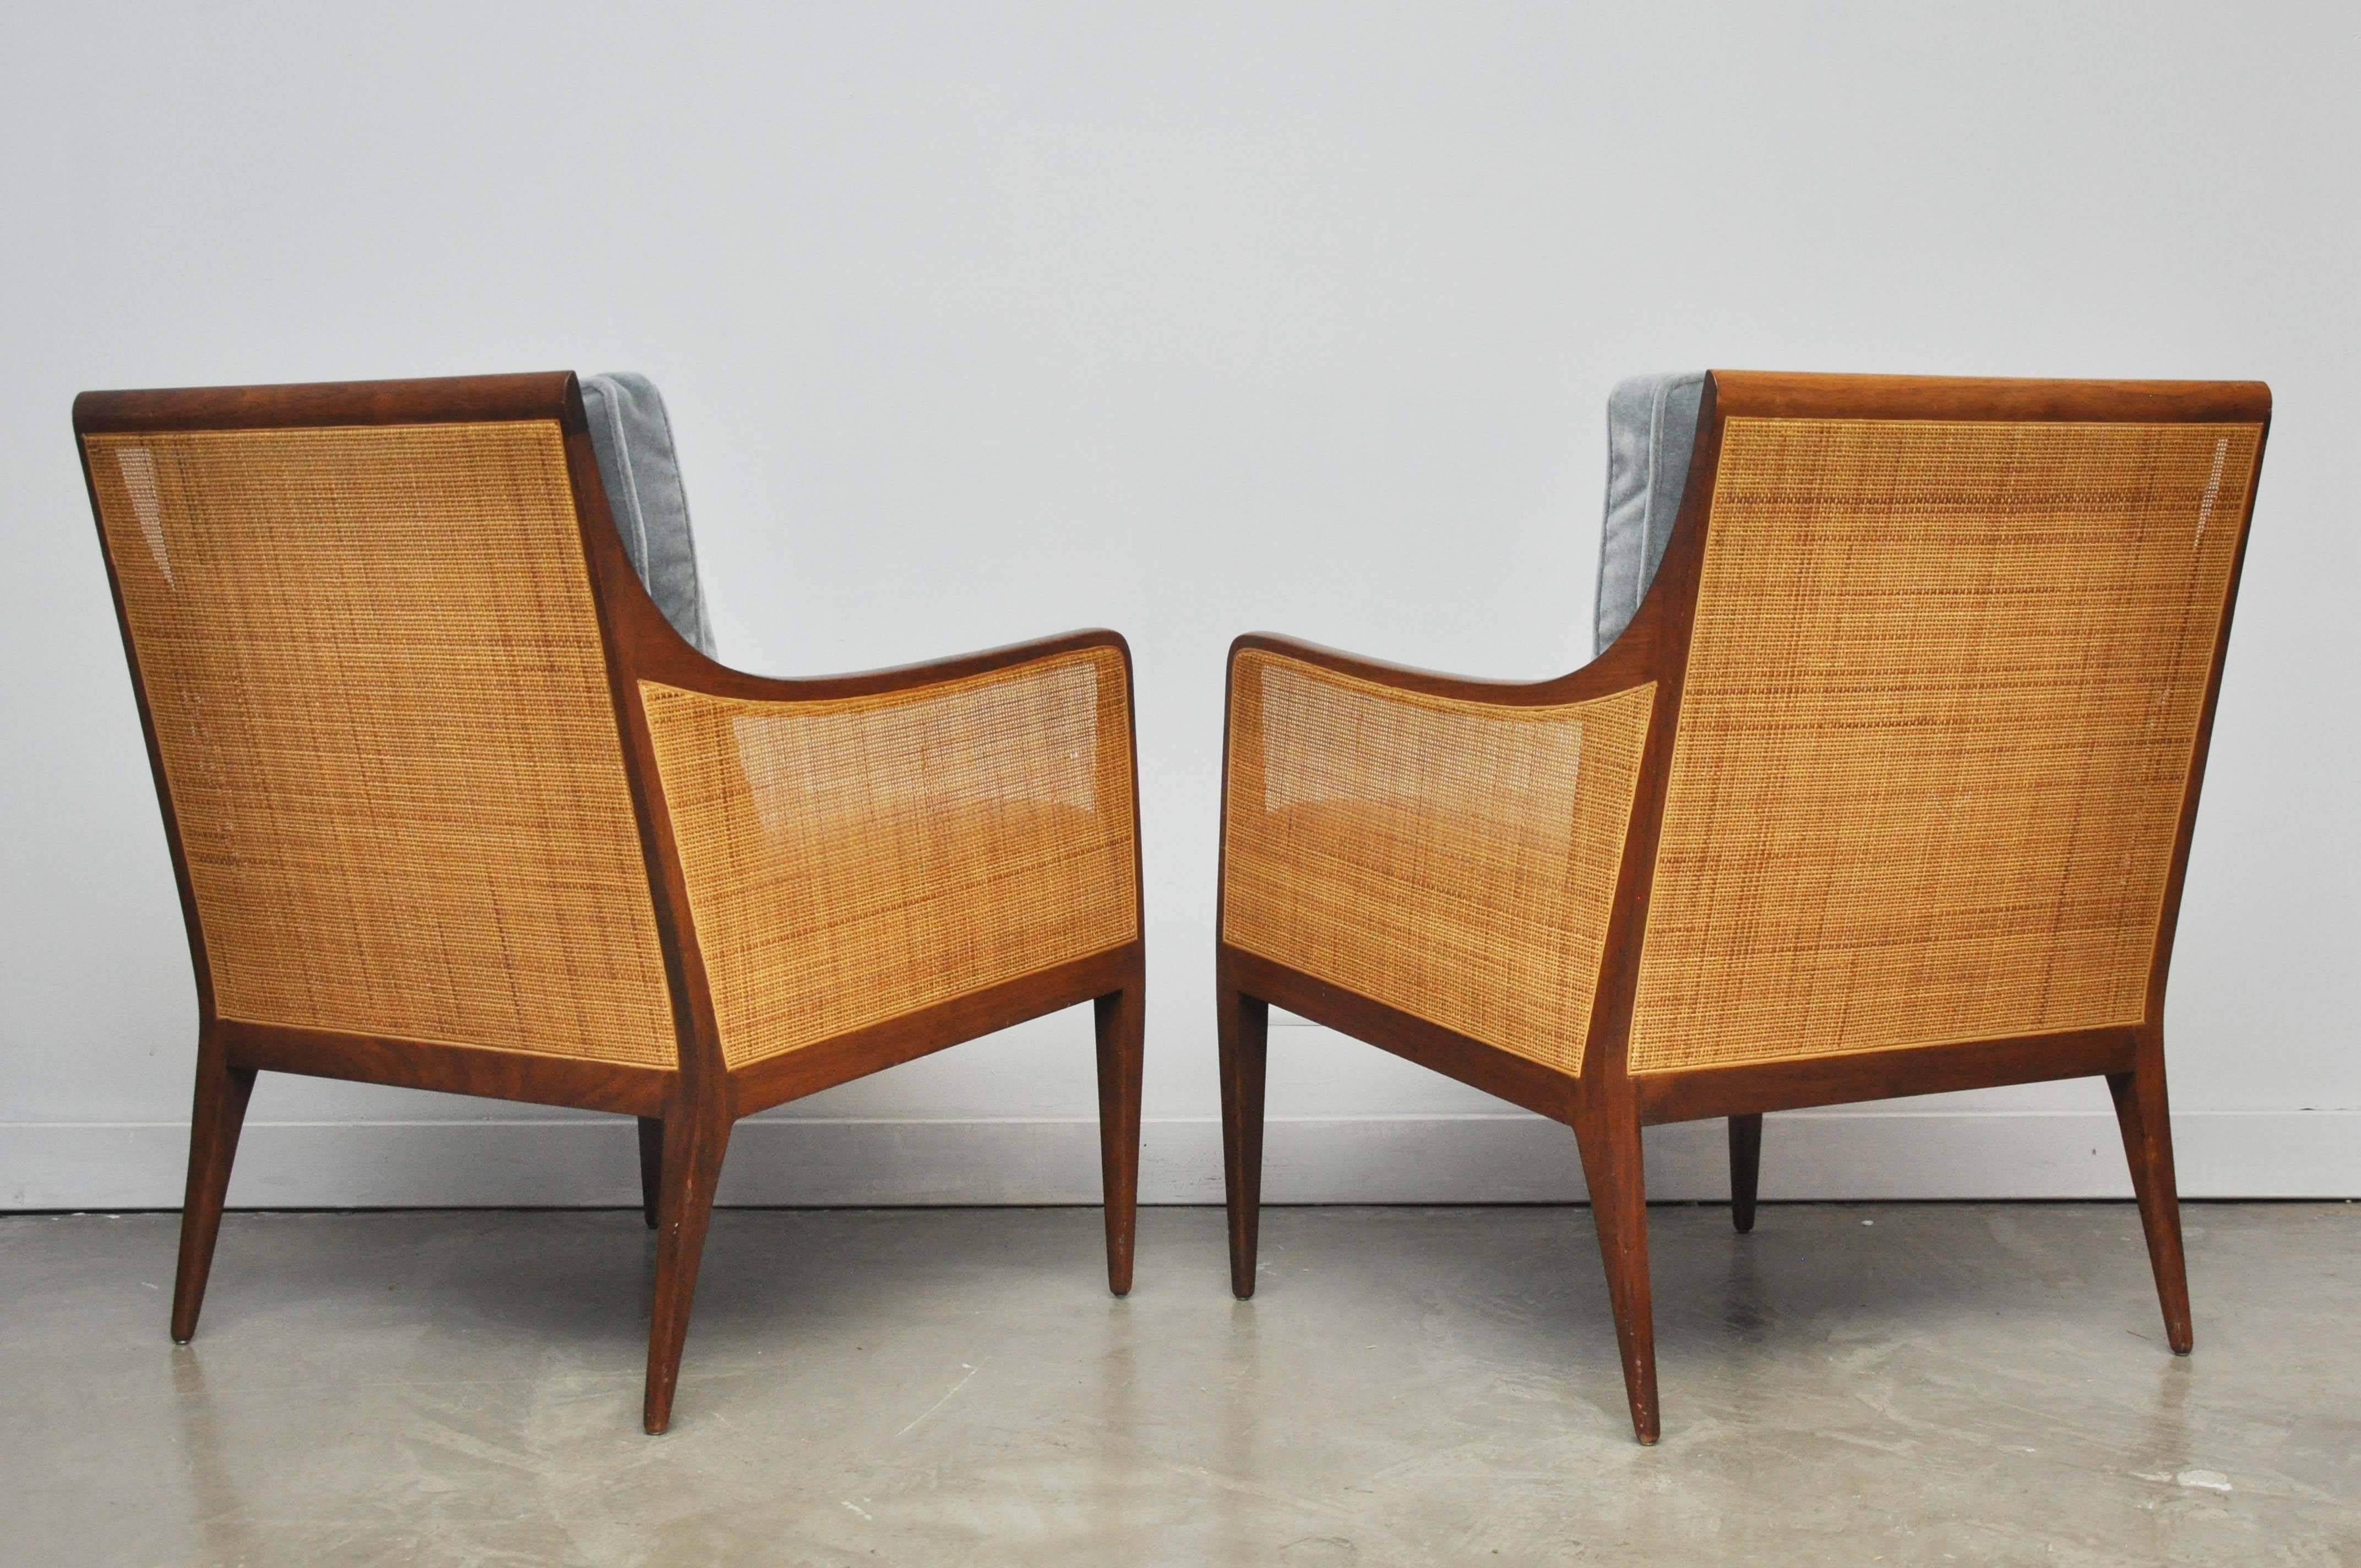 20th Century Cane Lounge Chairs by Milo Baughman for Directional